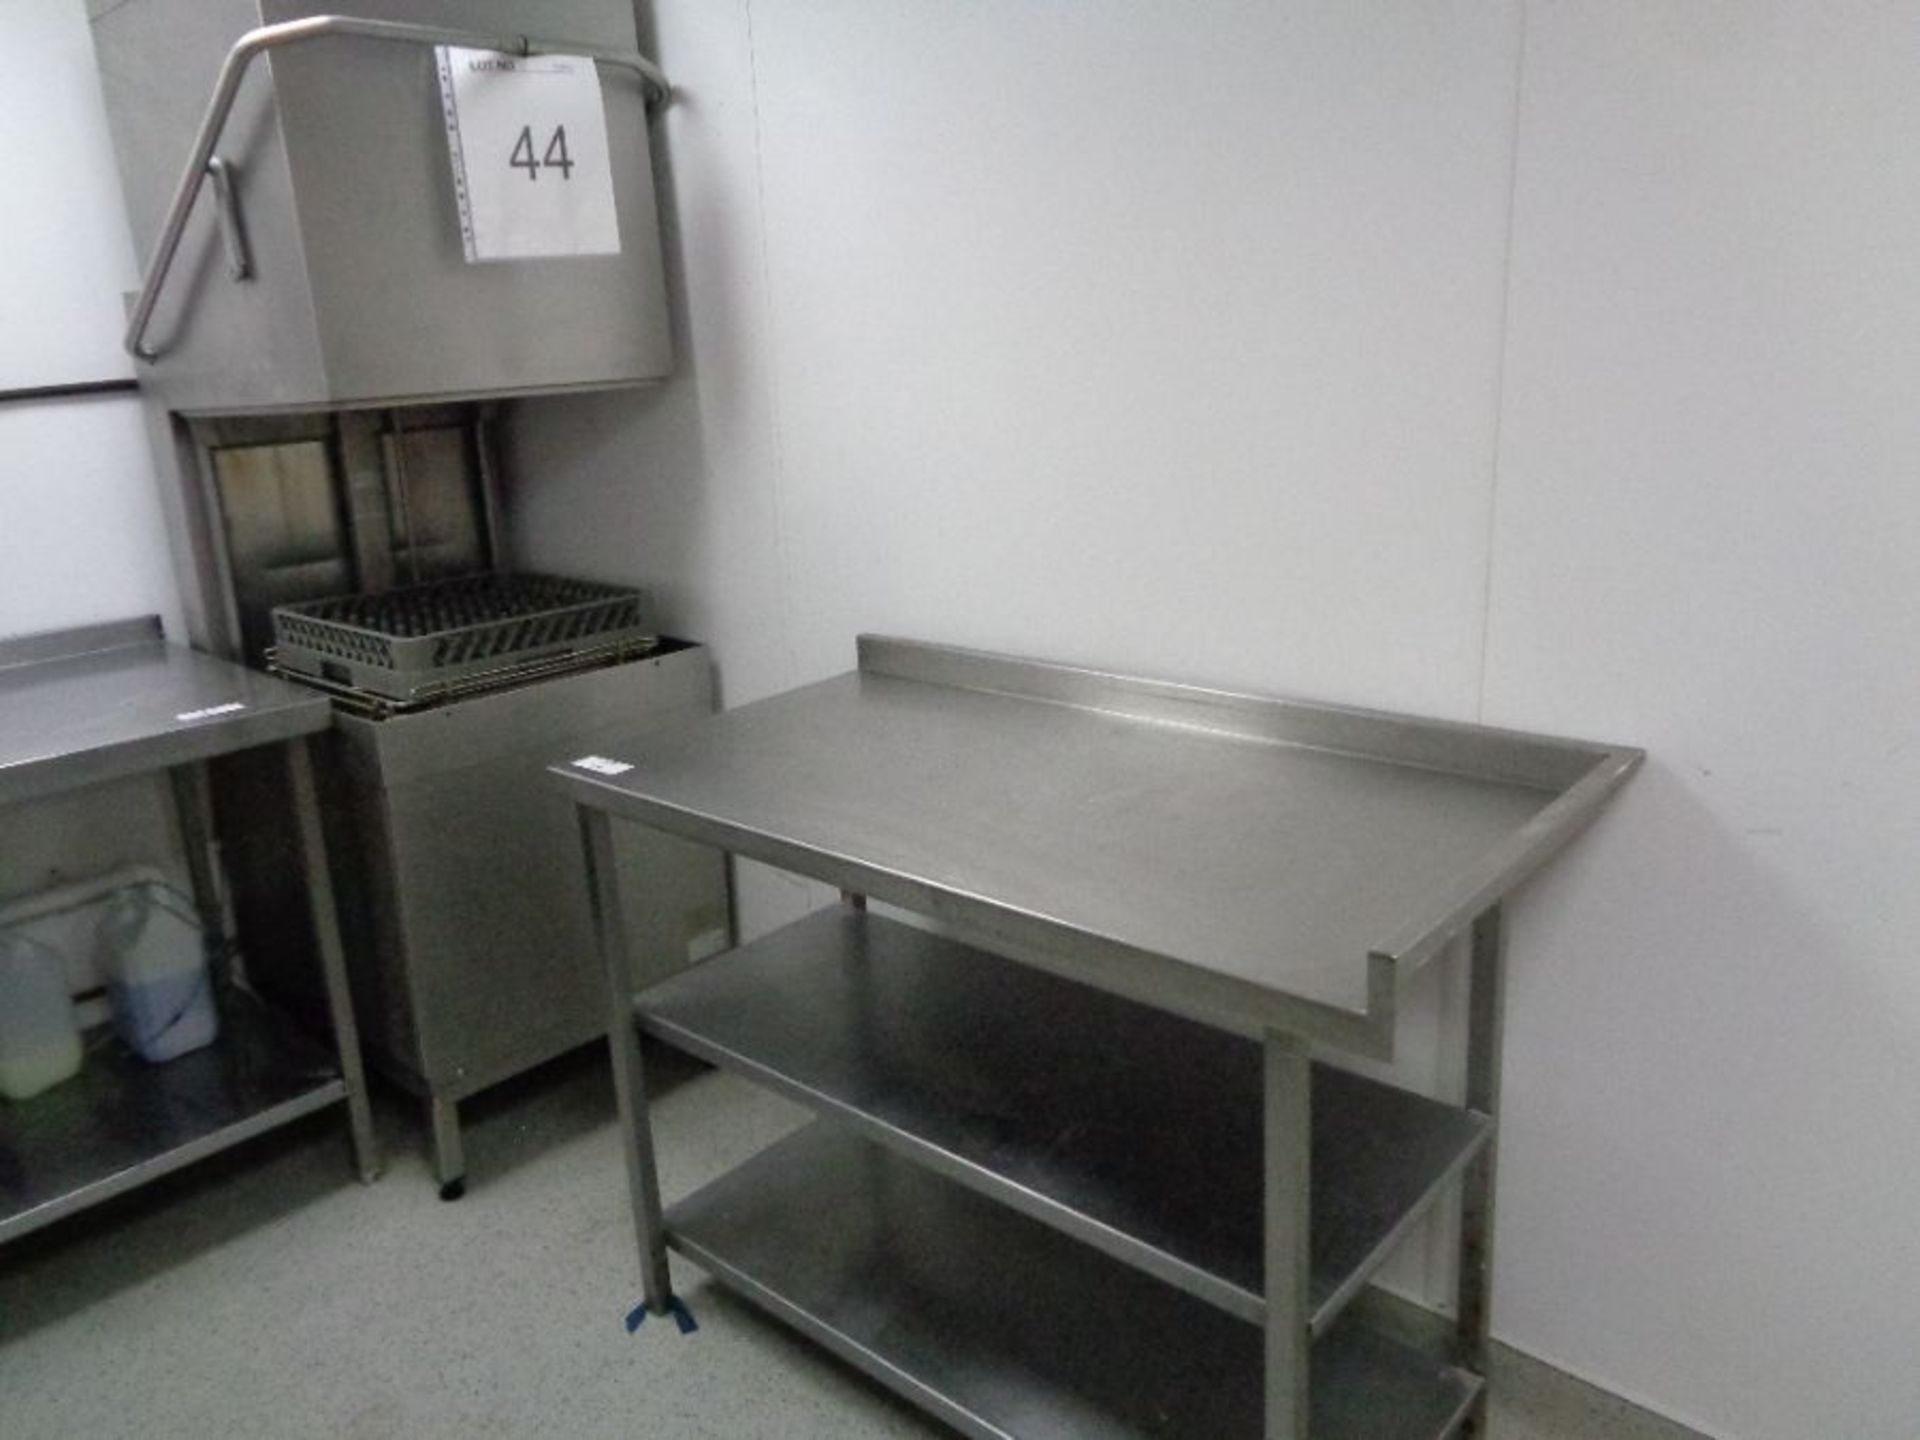 Hobart model AUPS 31 pass through dishwasher with draining table - Image 2 of 2